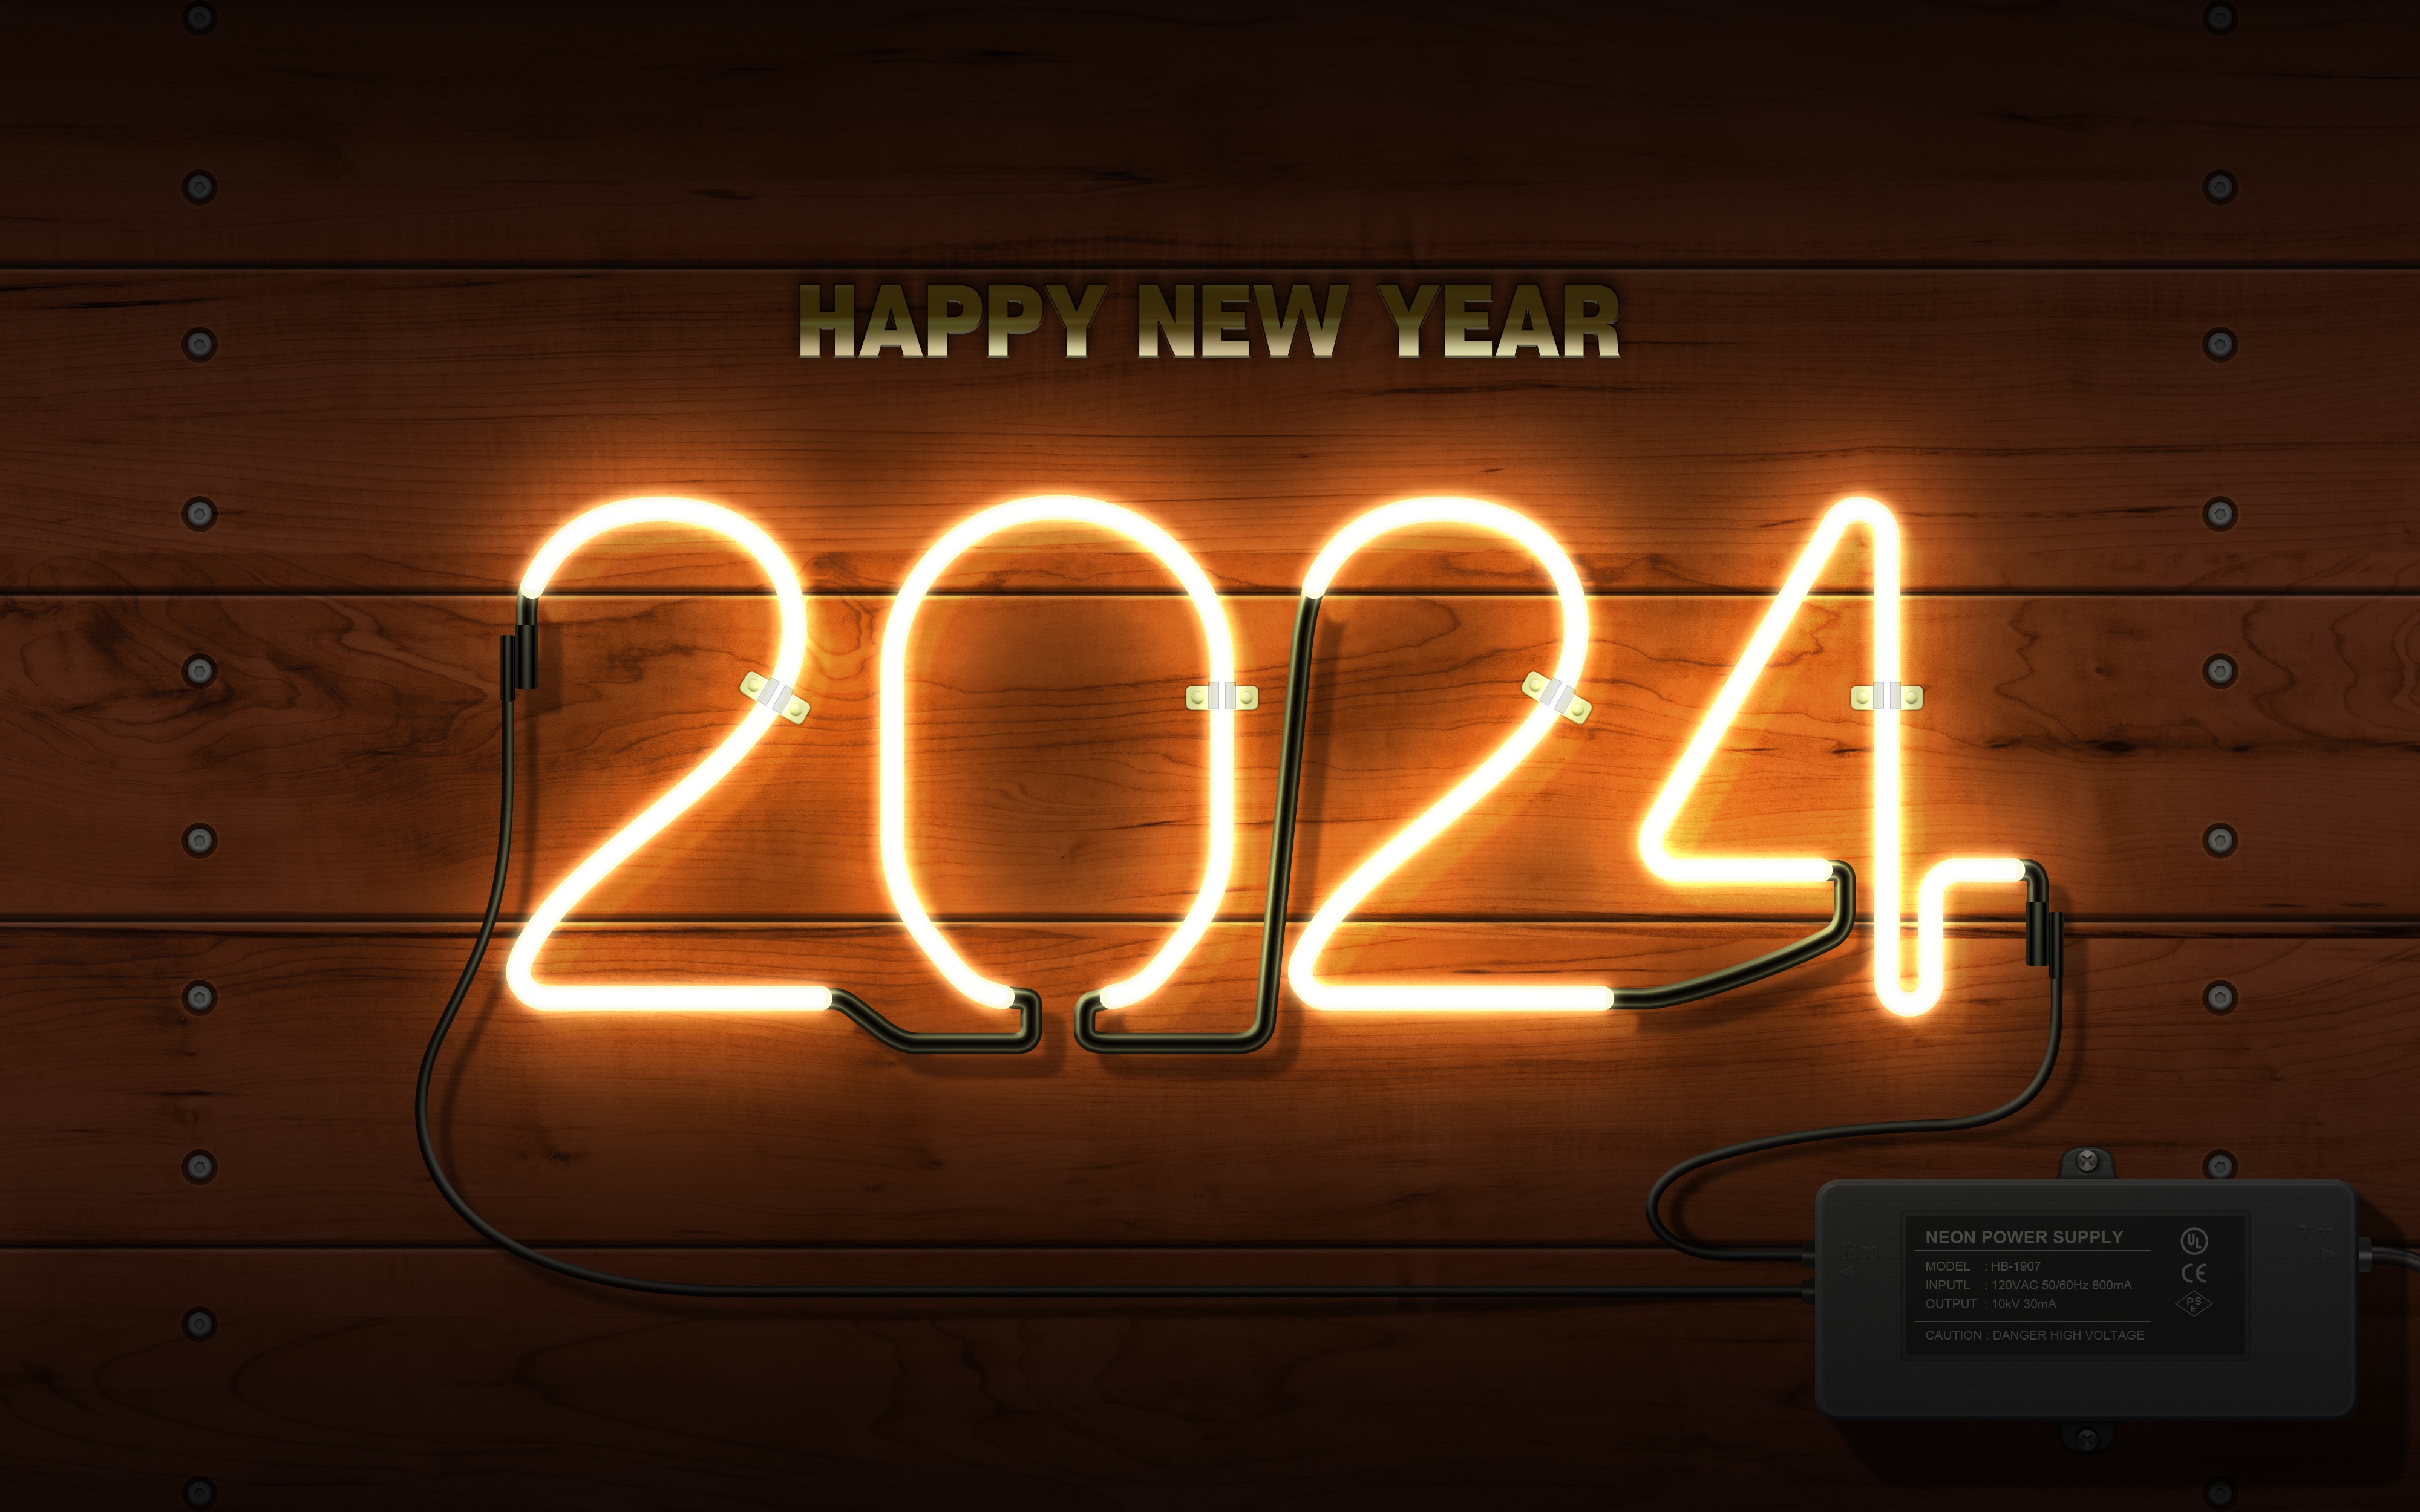 Download wallpaper new year, neon, happy new yaer, neon sign, 2024 year, section new year / christmas in resolution 4000x2500